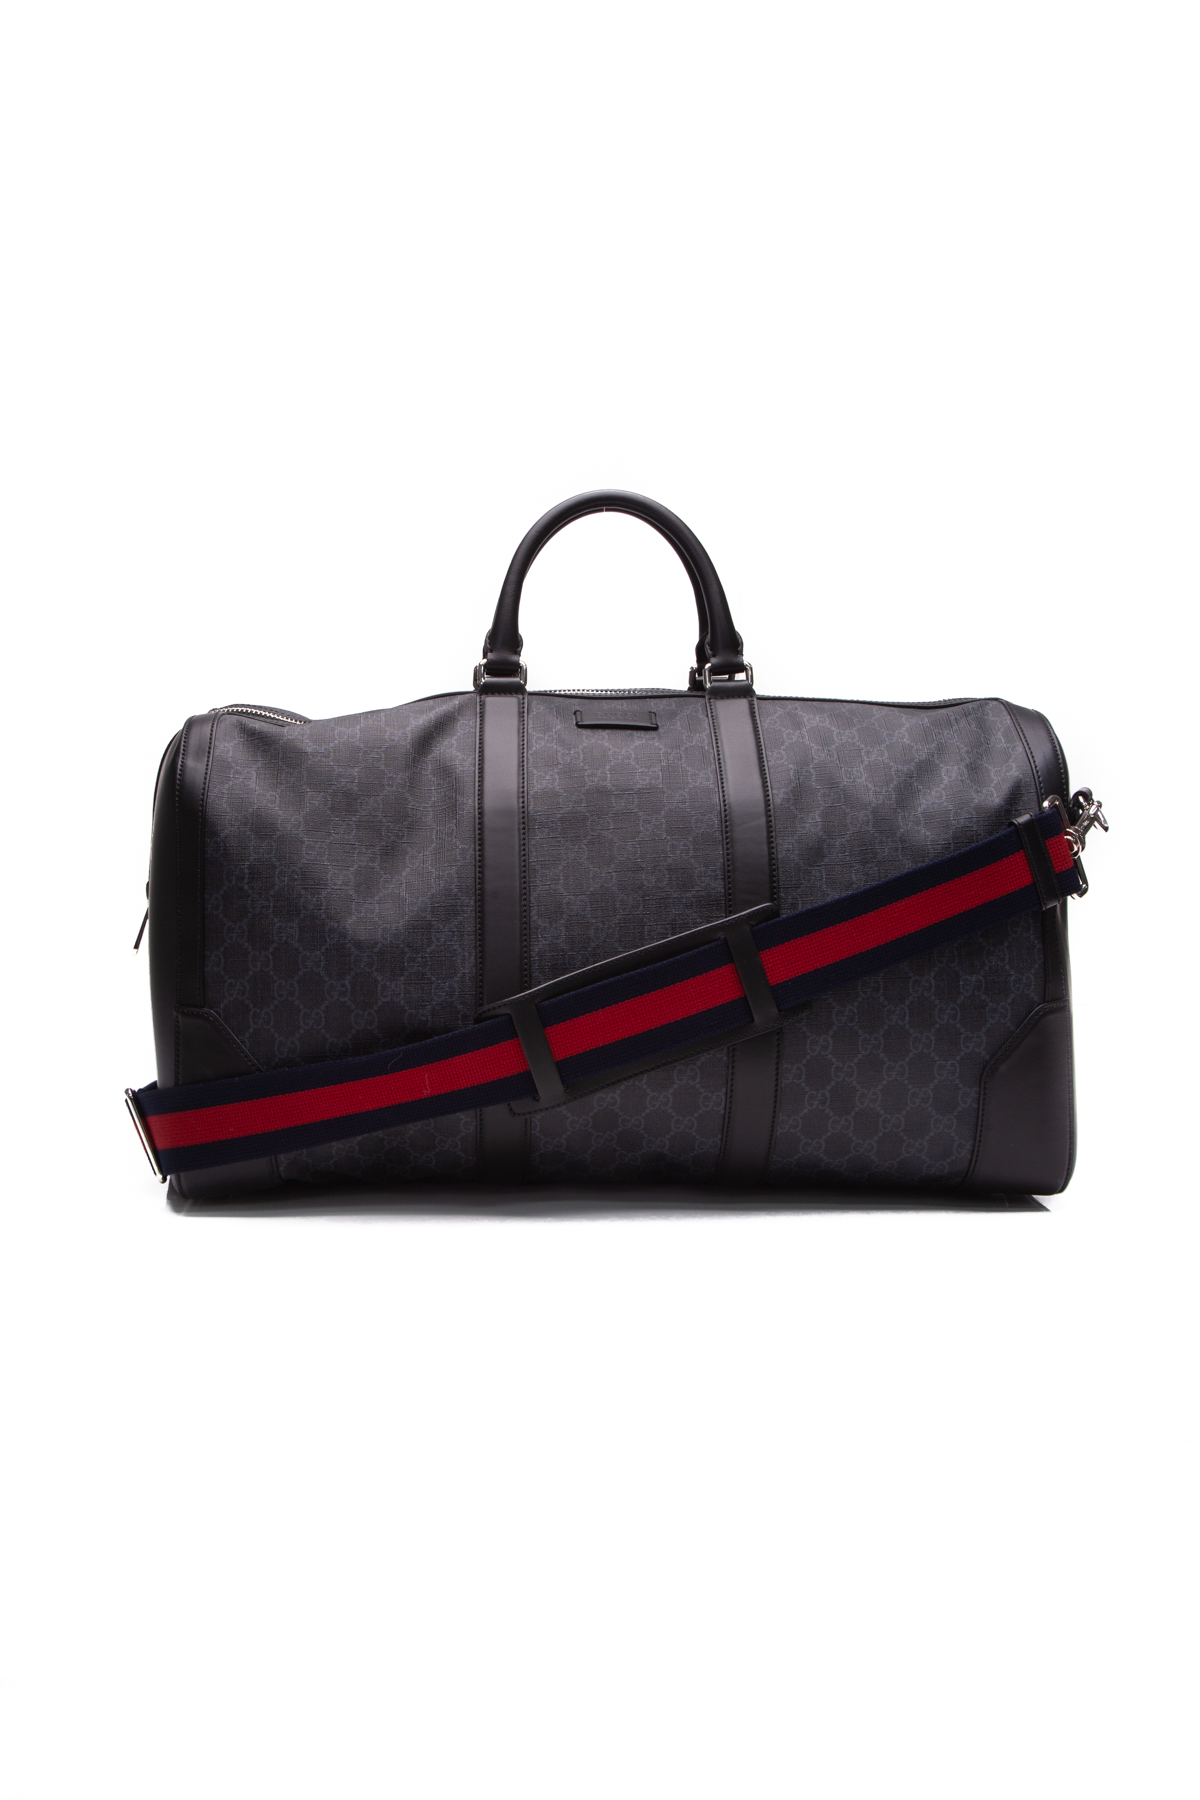 Gucci GG Black Carry-On Duffle Bag